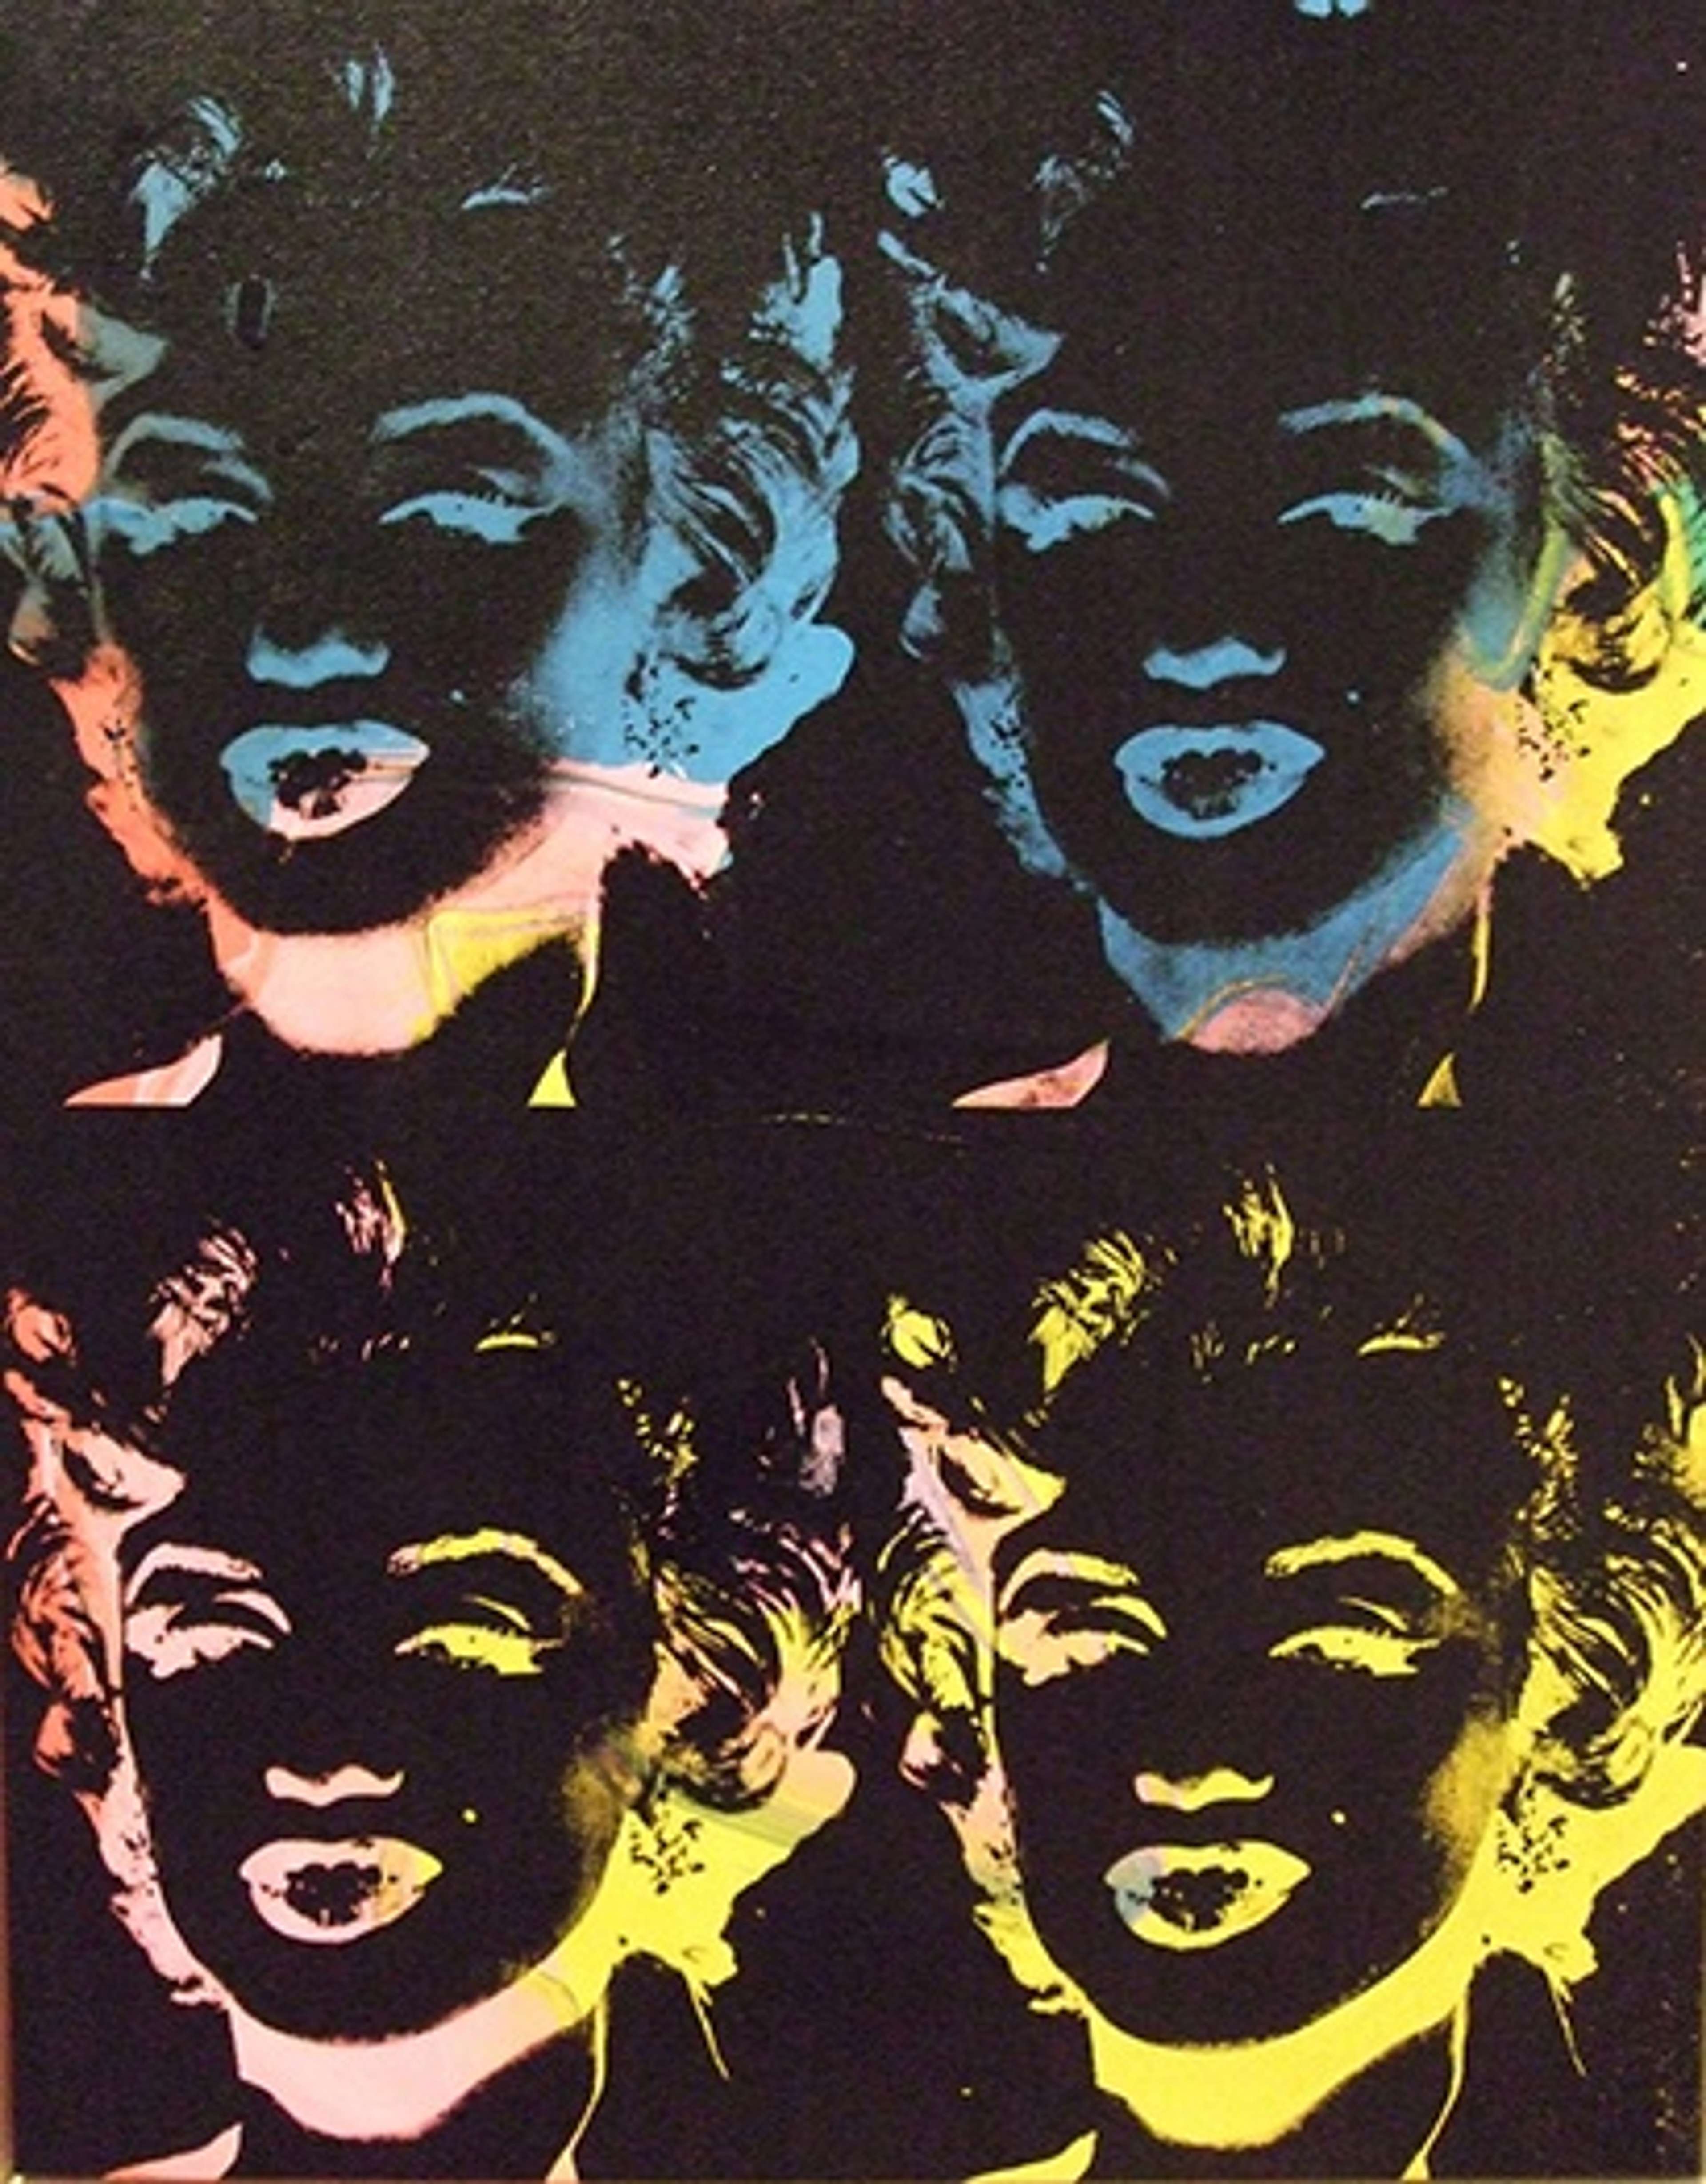 Four Multicolored Marilyns by Andy Warhol - © Jim Linwood. (CC) BY 2.0